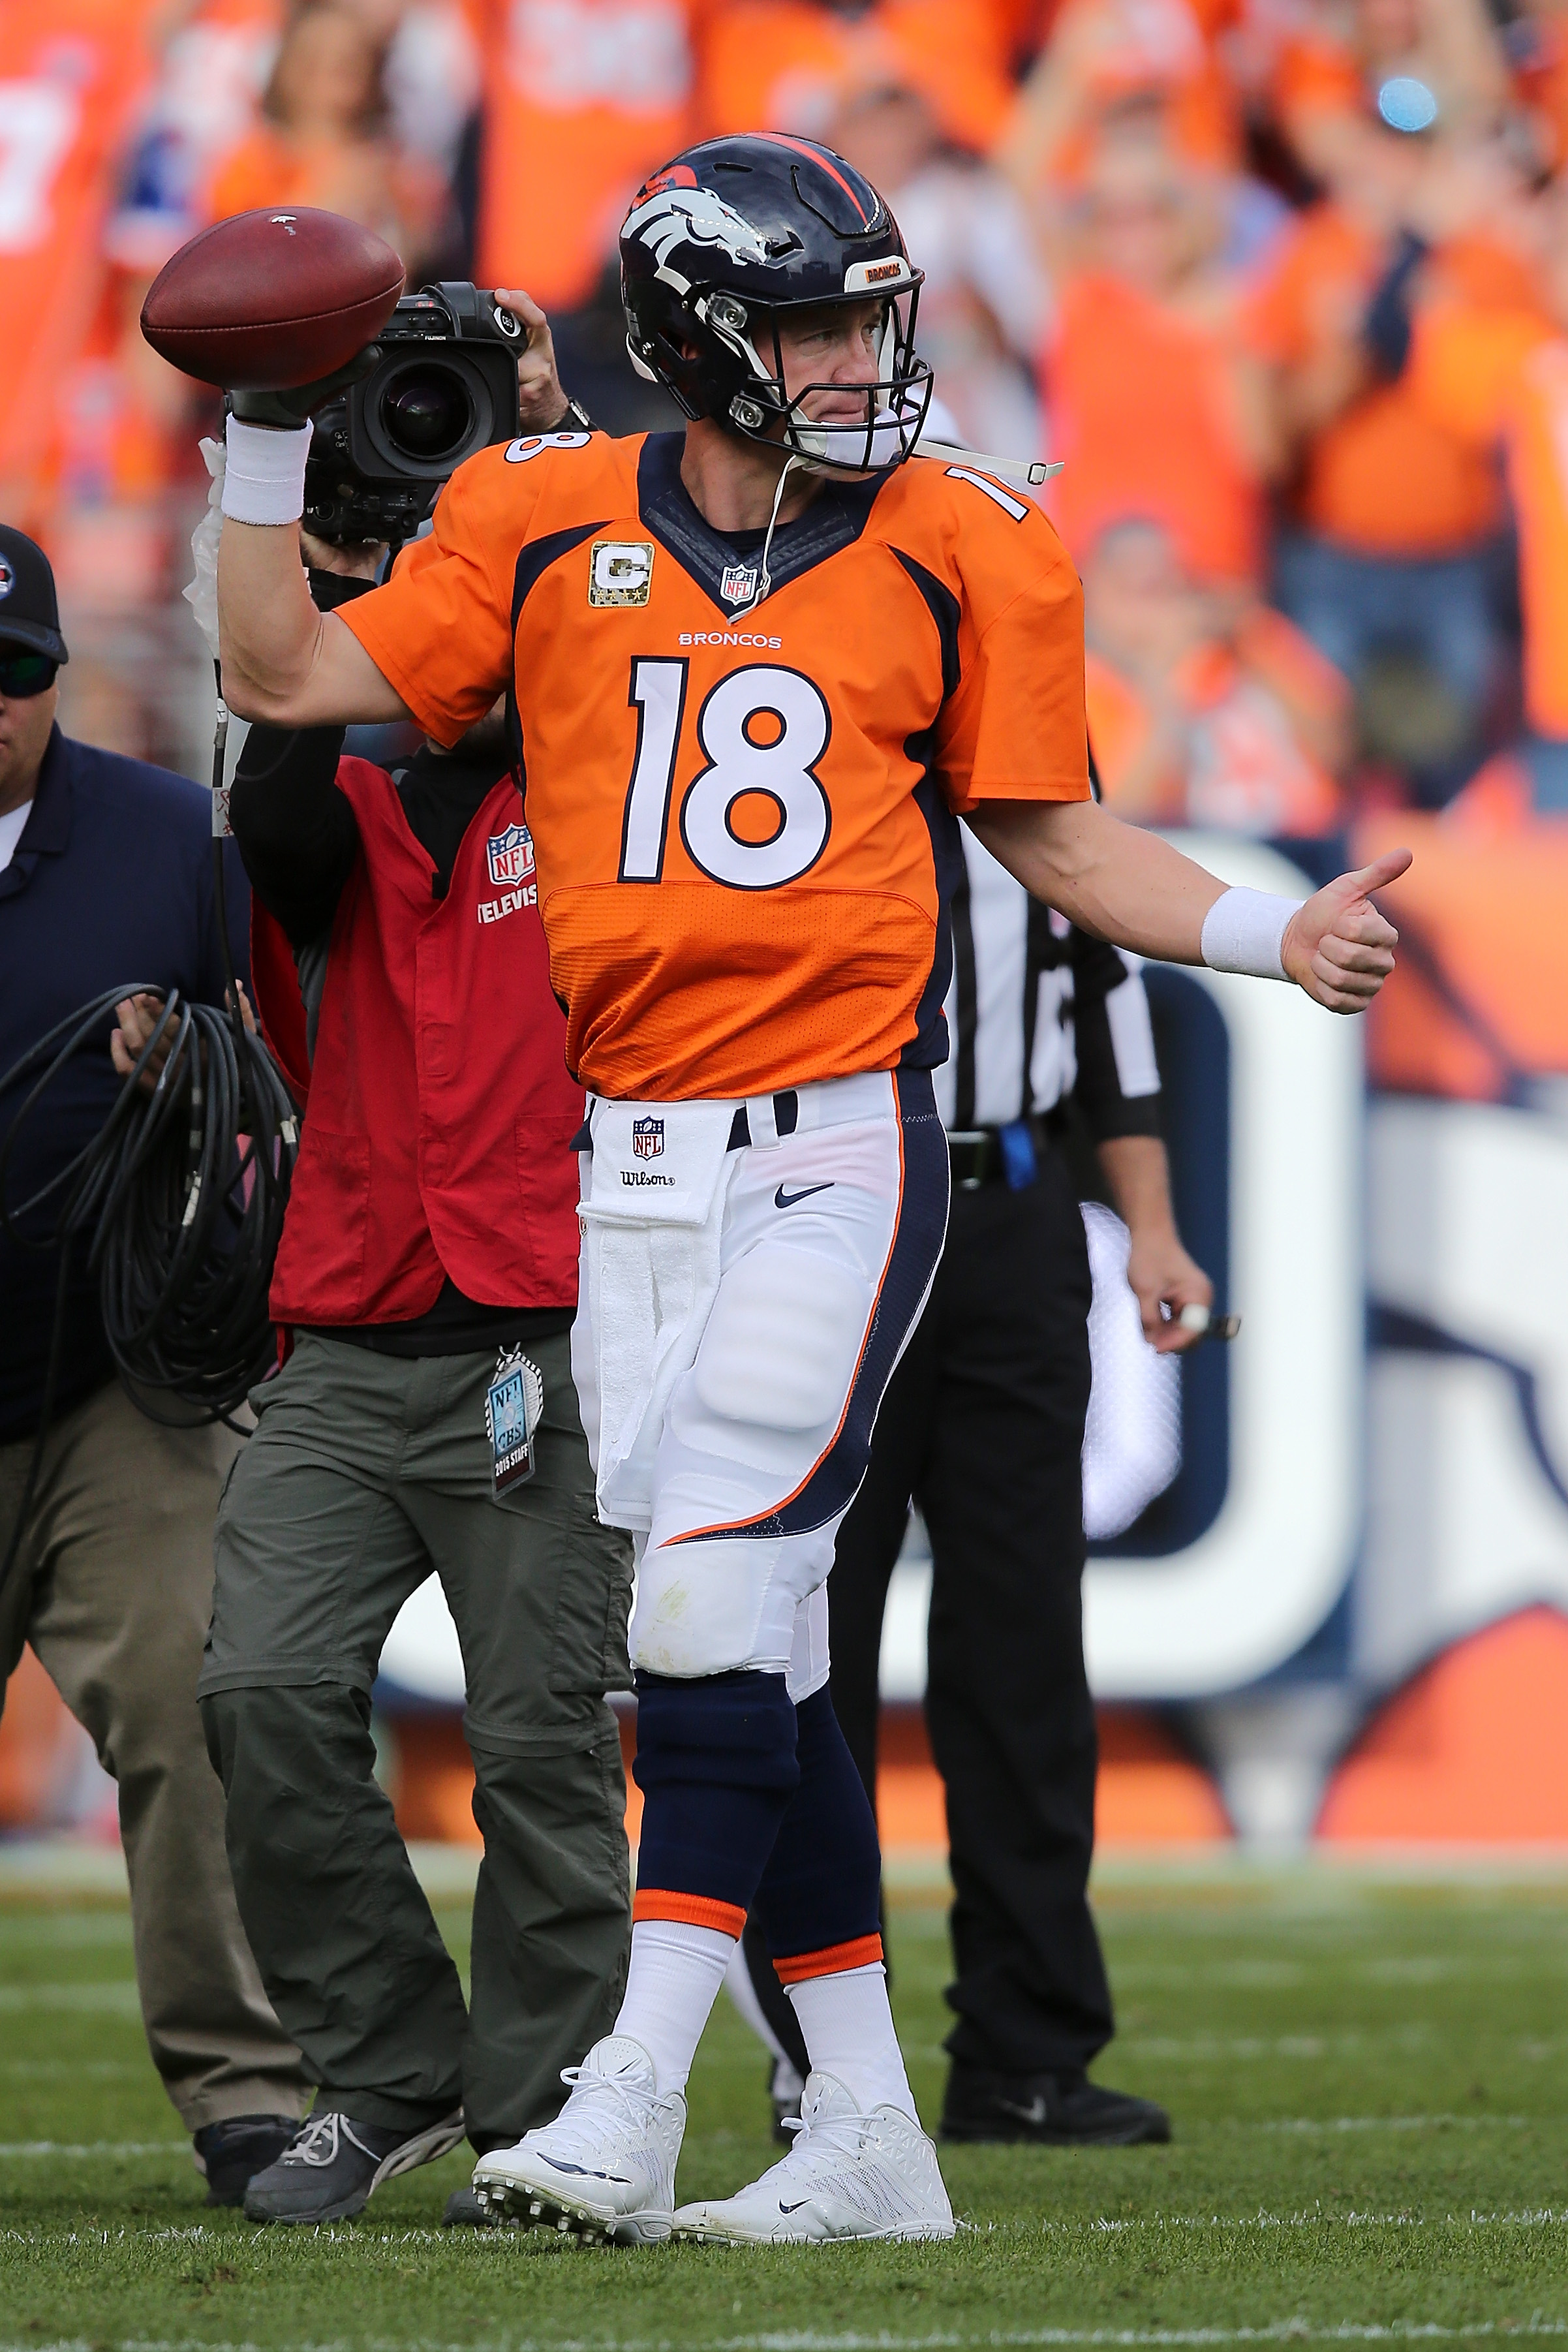 Peyton Manning gives a thumbs-up after setting the NFL record for passing yards. (Photo by Doug Pensinger/Getty Images)